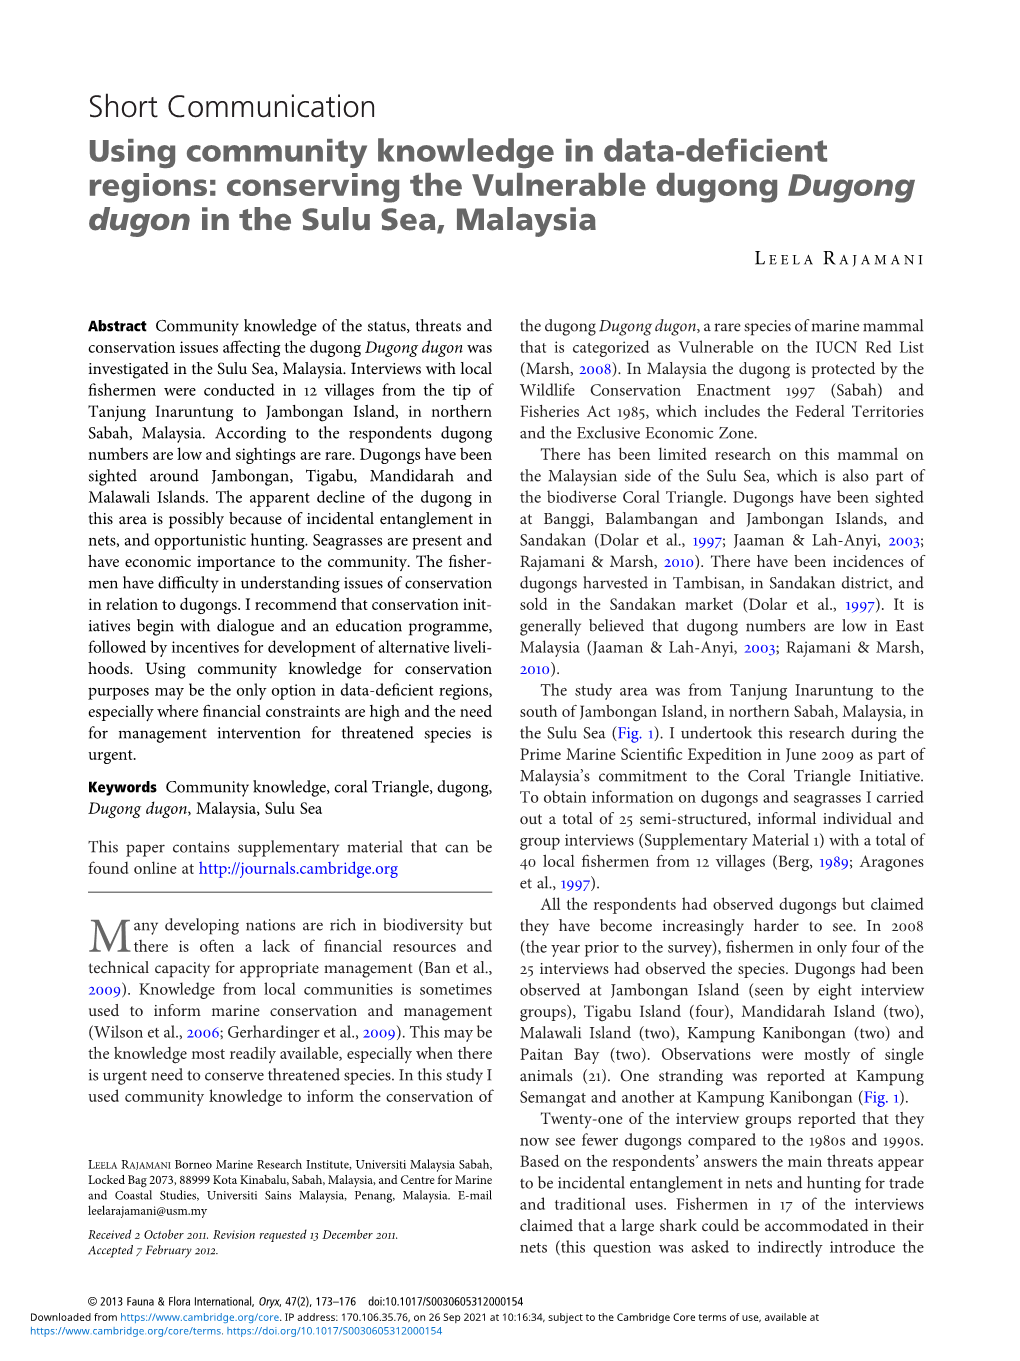 Conserving the Vulnerable Dugong Dugong Dugon in the Sulu Sea, Malaysia